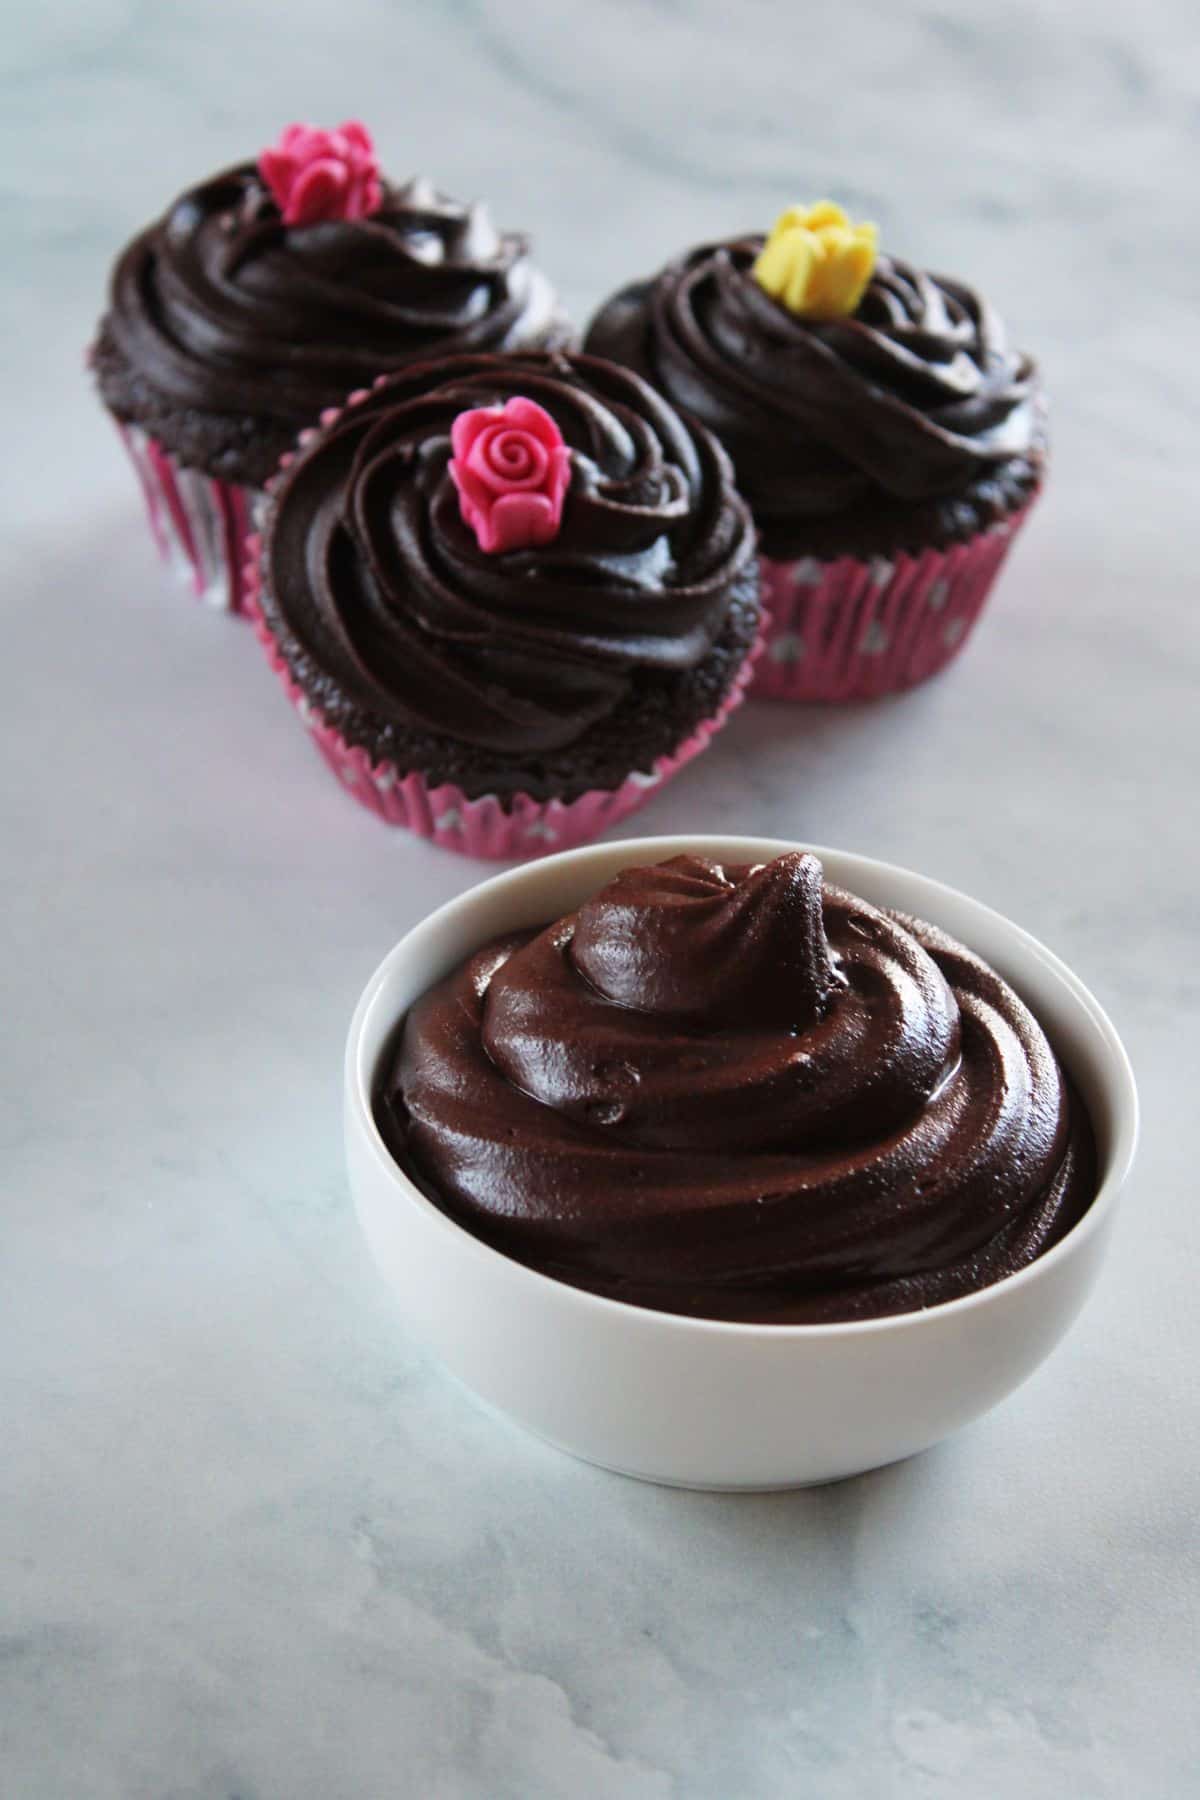 small white dish of chocolate frosting, with three cupcakes in the background, on a white marble benchtop.